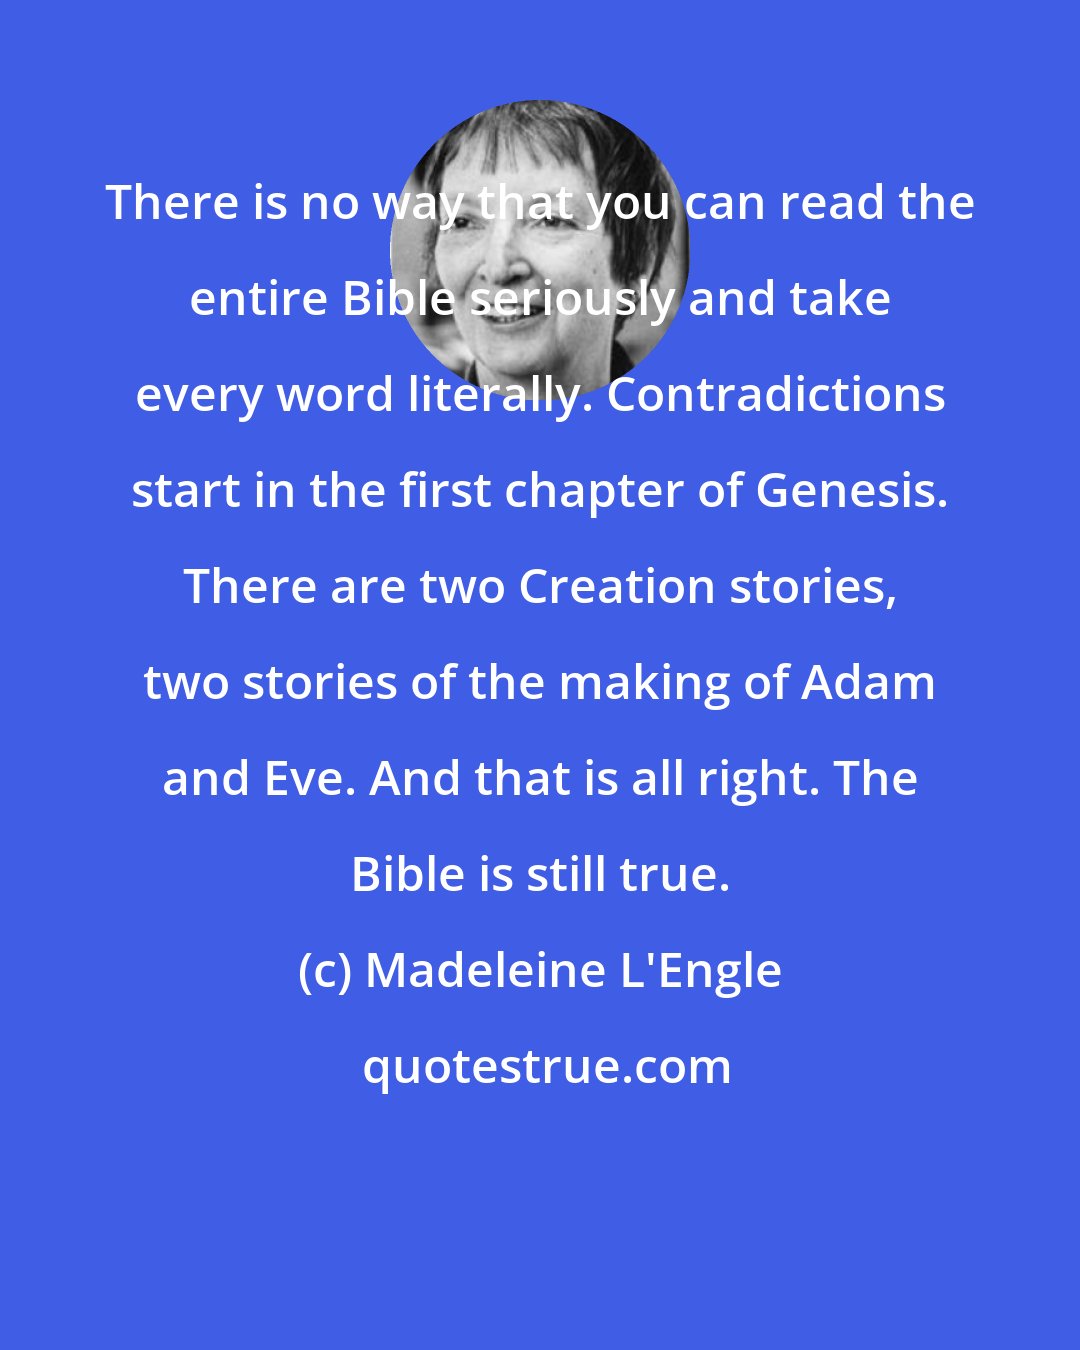 Madeleine L'Engle: There is no way that you can read the entire Bible seriously and take every word literally. Contradictions start in the first chapter of Genesis. There are two Creation stories, two stories of the making of Adam and Eve. And that is all right. The Bible is still true.